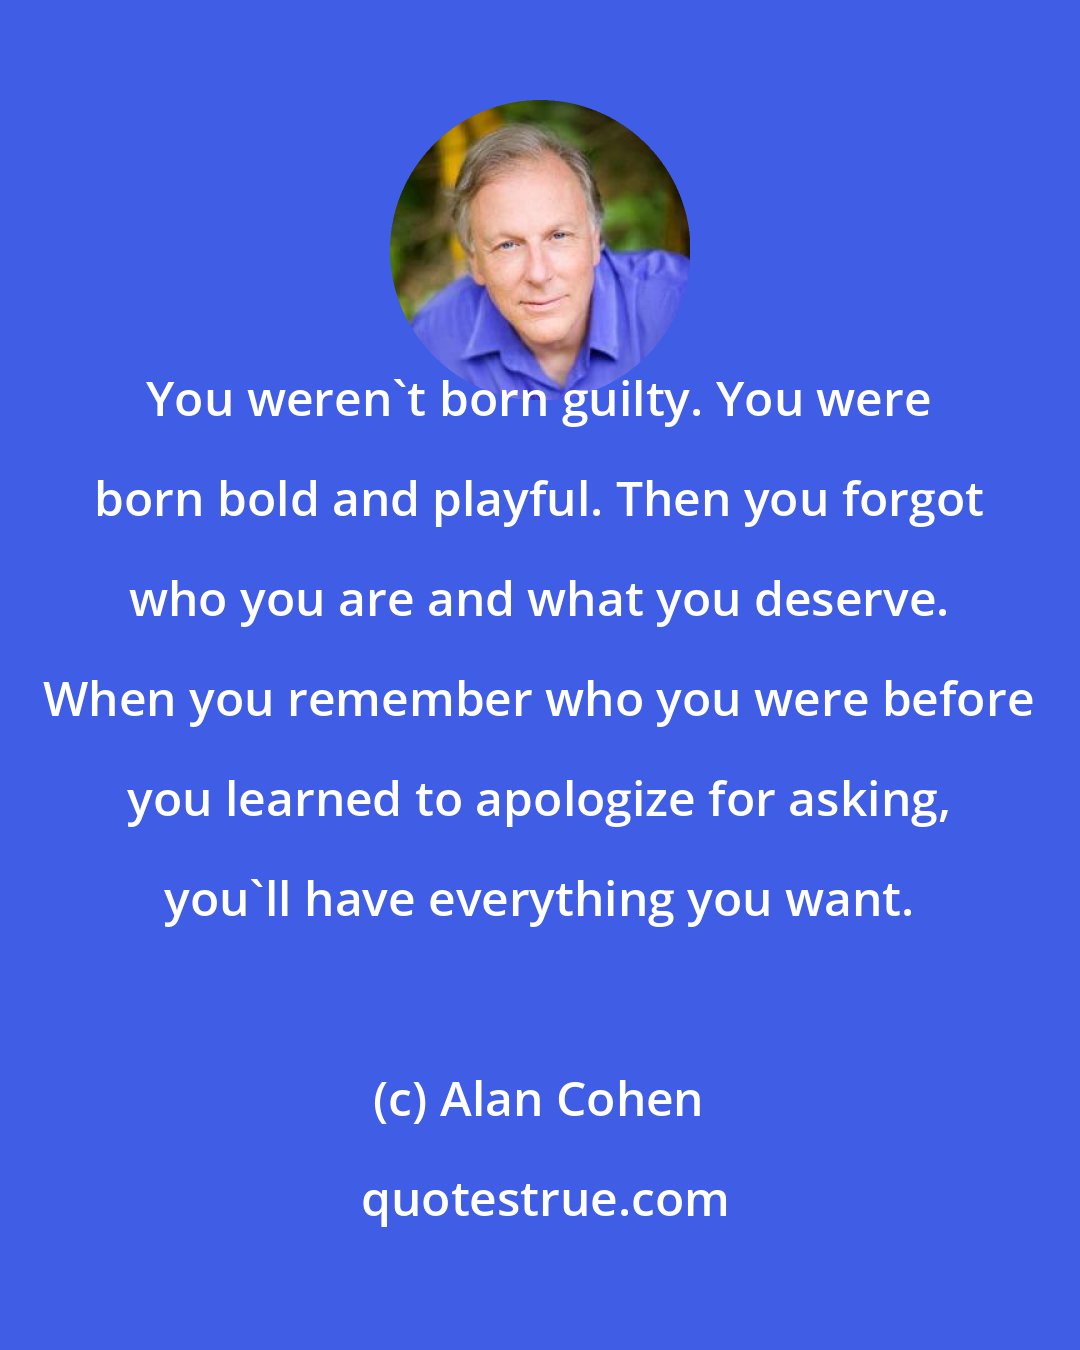 Alan Cohen: You weren't born guilty. You were born bold and playful. Then you forgot who you are and what you deserve. When you remember who you were before you learned to apologize for asking, you'll have everything you want.